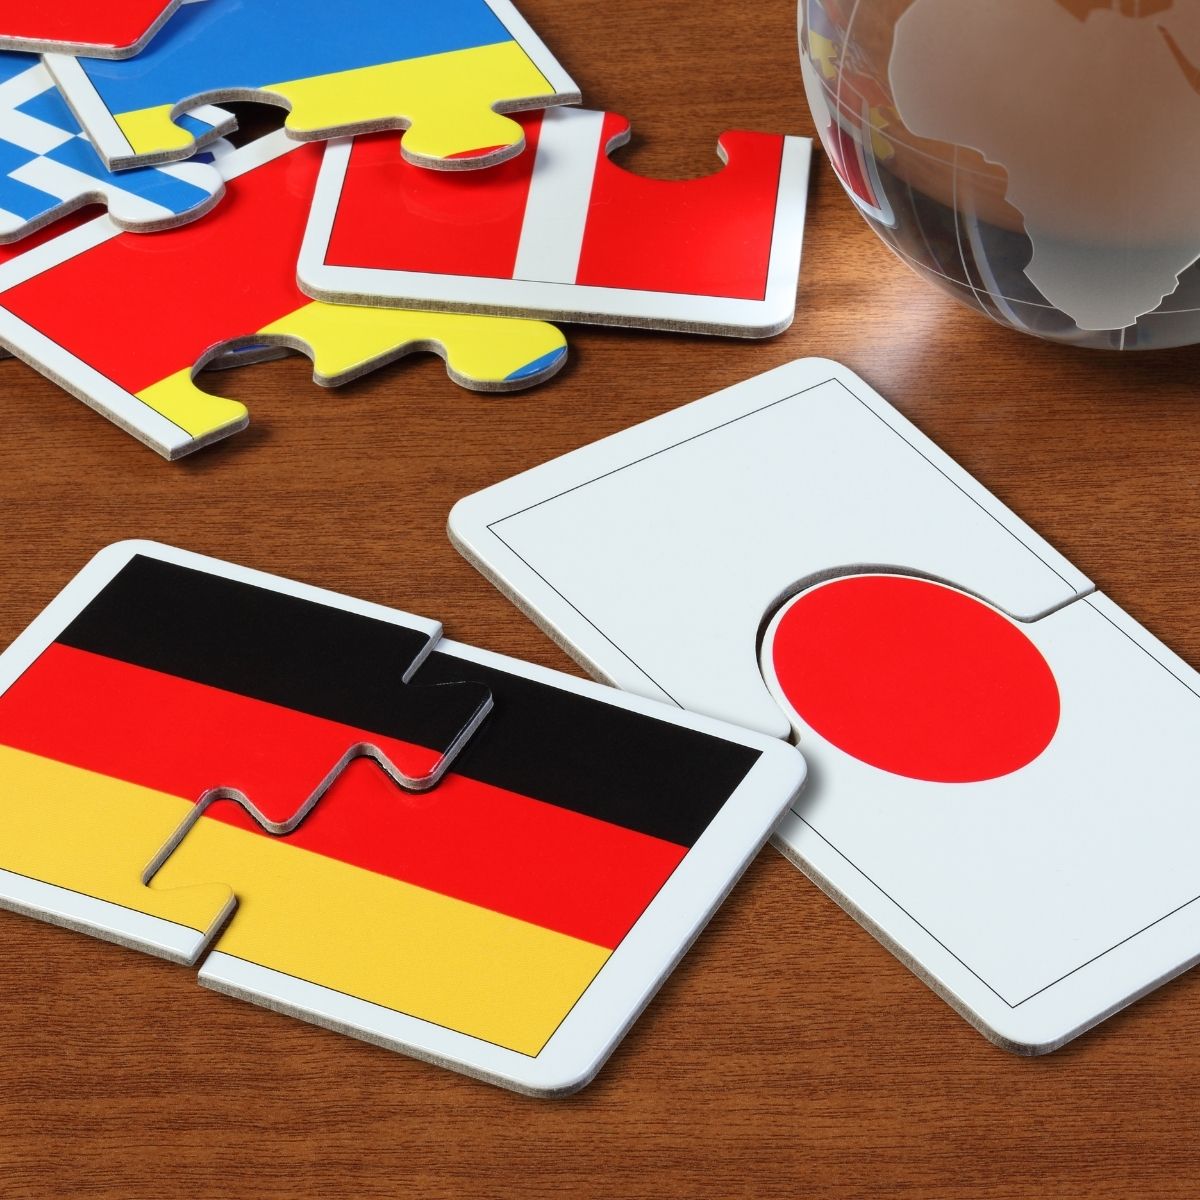 Japanese and German flags representing the best steel for hair shears